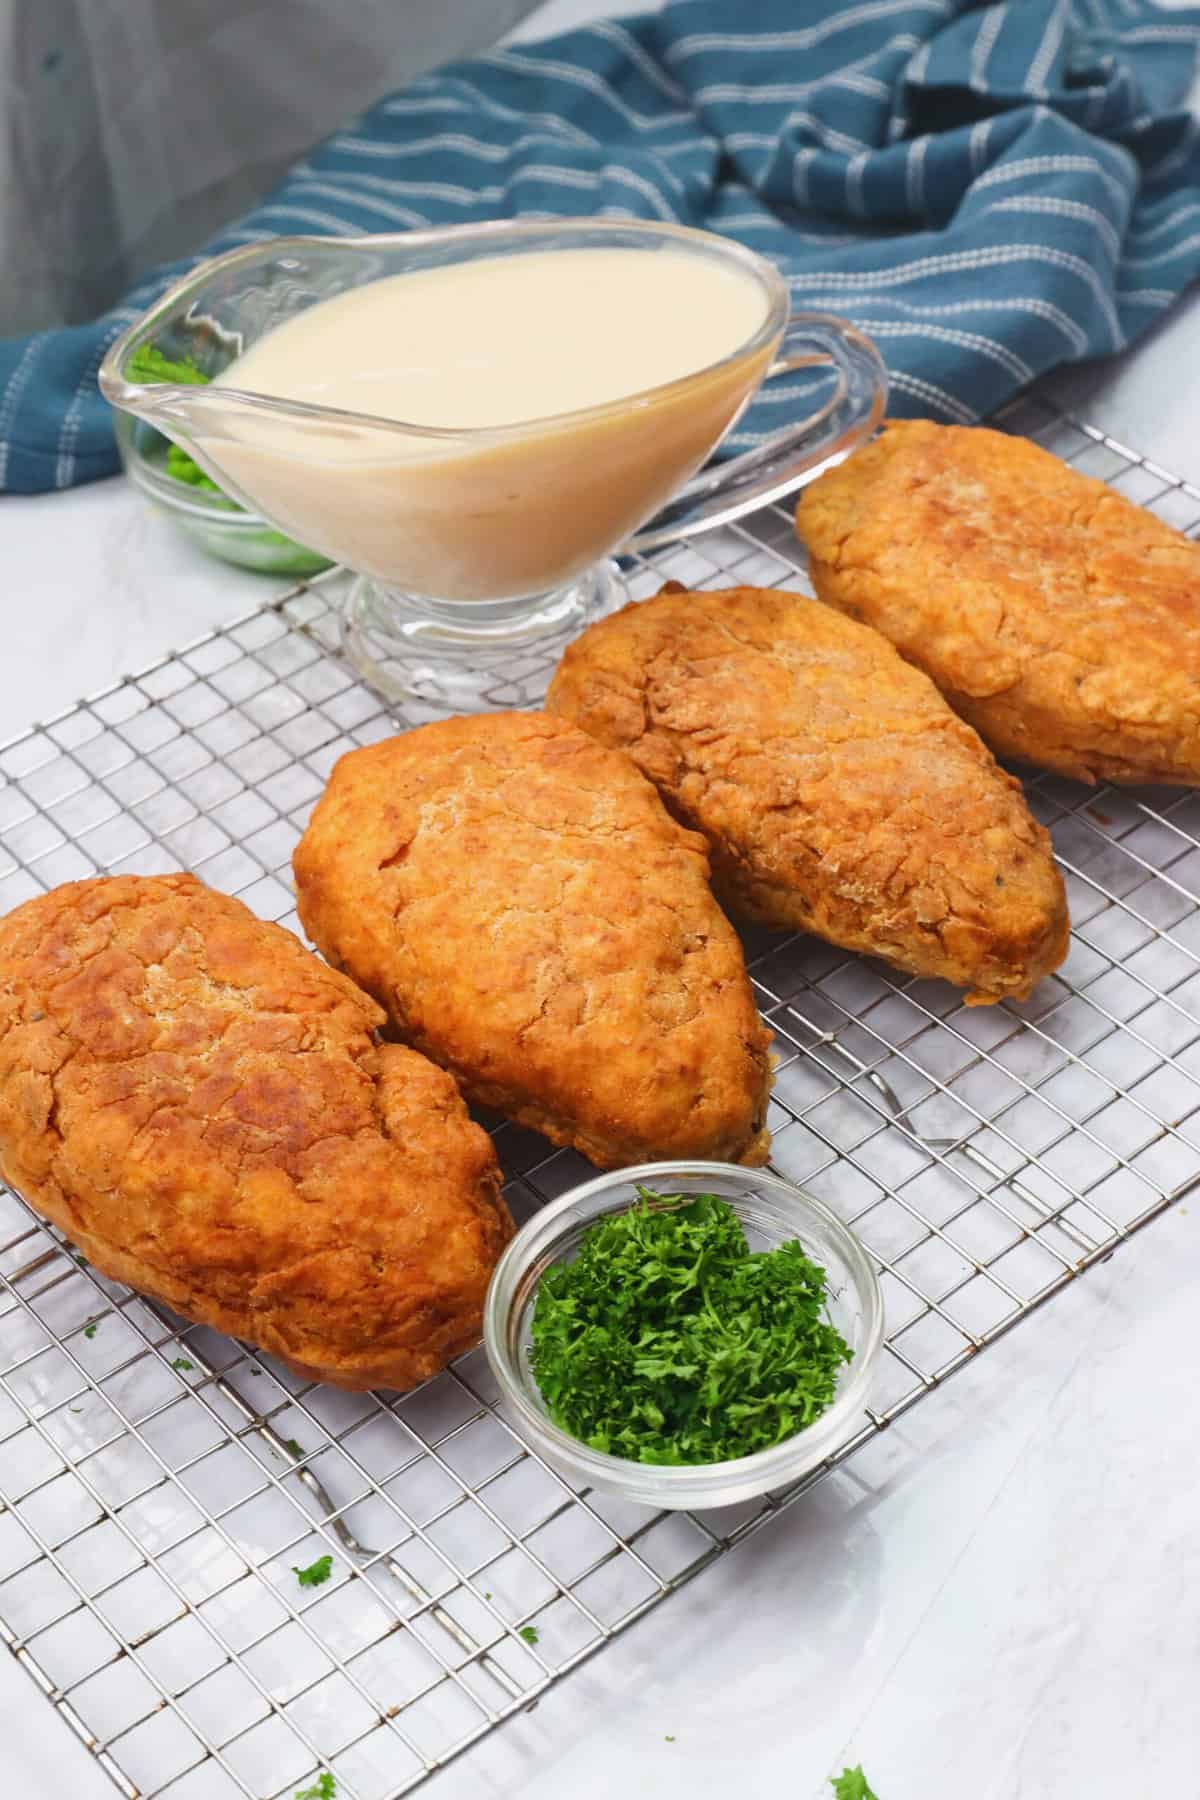 Enjoy maximum comfort with insanely delicious fried chicken breasts with ranch dressing on the side